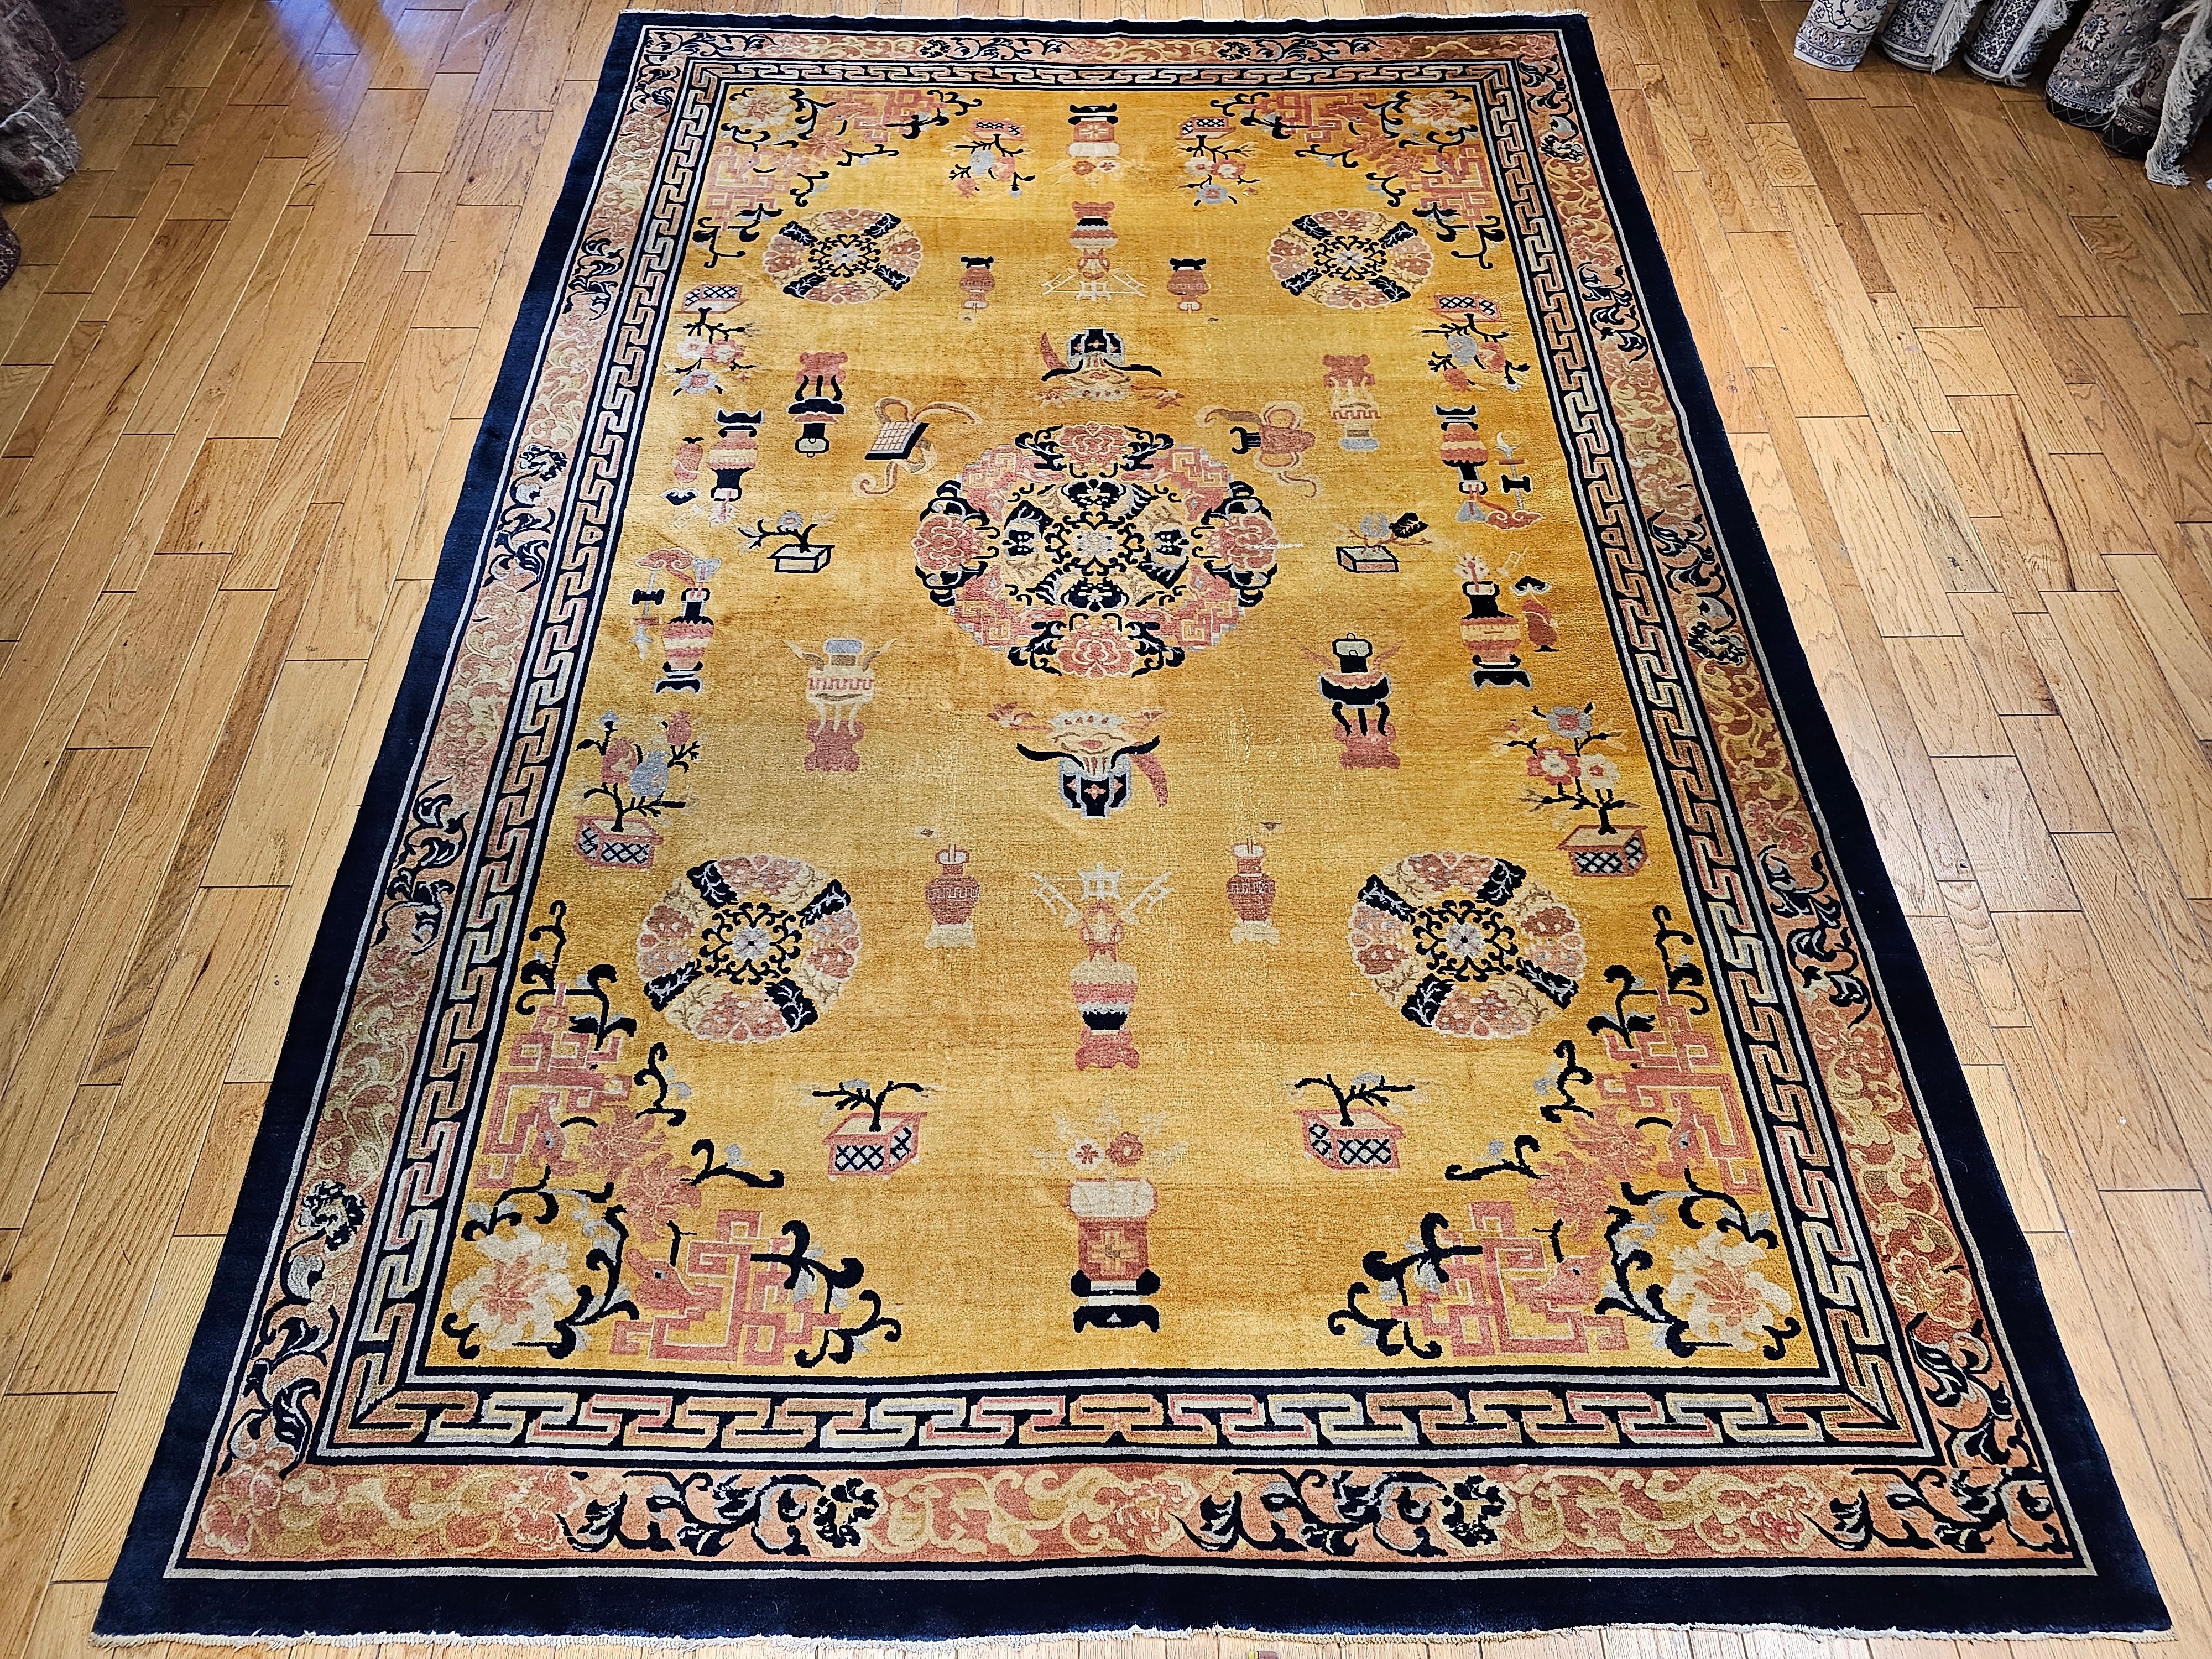 An extremely rare Art Deco Chinese Rug in pastel or pale yellow color.  Breathtakingly Beautiful! The rug has a collection of Chinese traditional symbols for life, happiness, and long life.  The design forms include potted plants, incense burners,